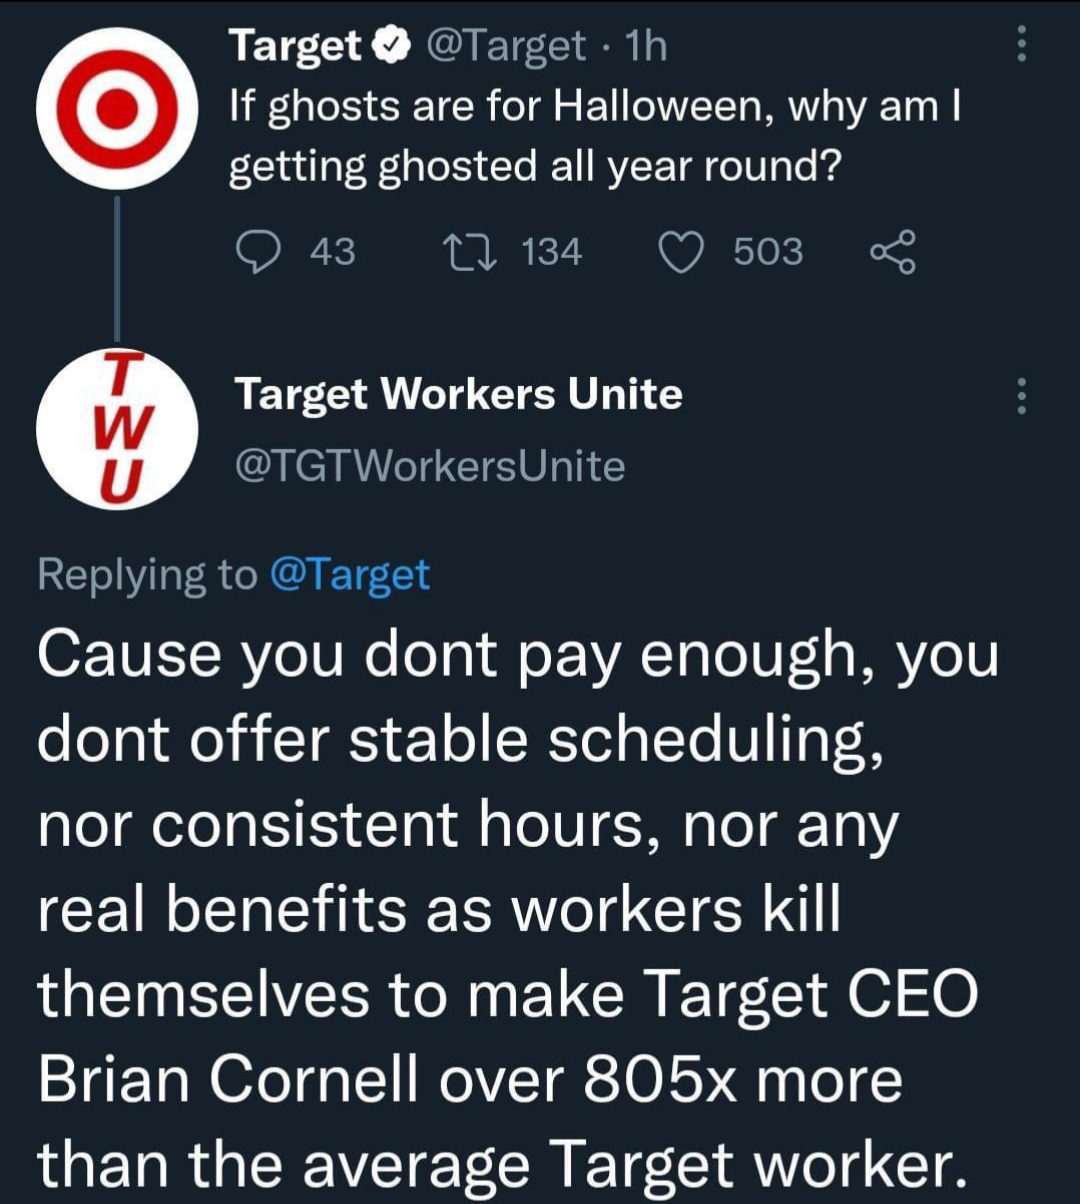 Bosses Owned by Employees  - beautiful quotes on life - Target 1h If ghosts are for Halloween, why am I getting ghosted all year round? 43 22 134 503 T Target Workers Unite W U Workers Unite Cause you dont pay enough, you dont offer stable scheduling, nor